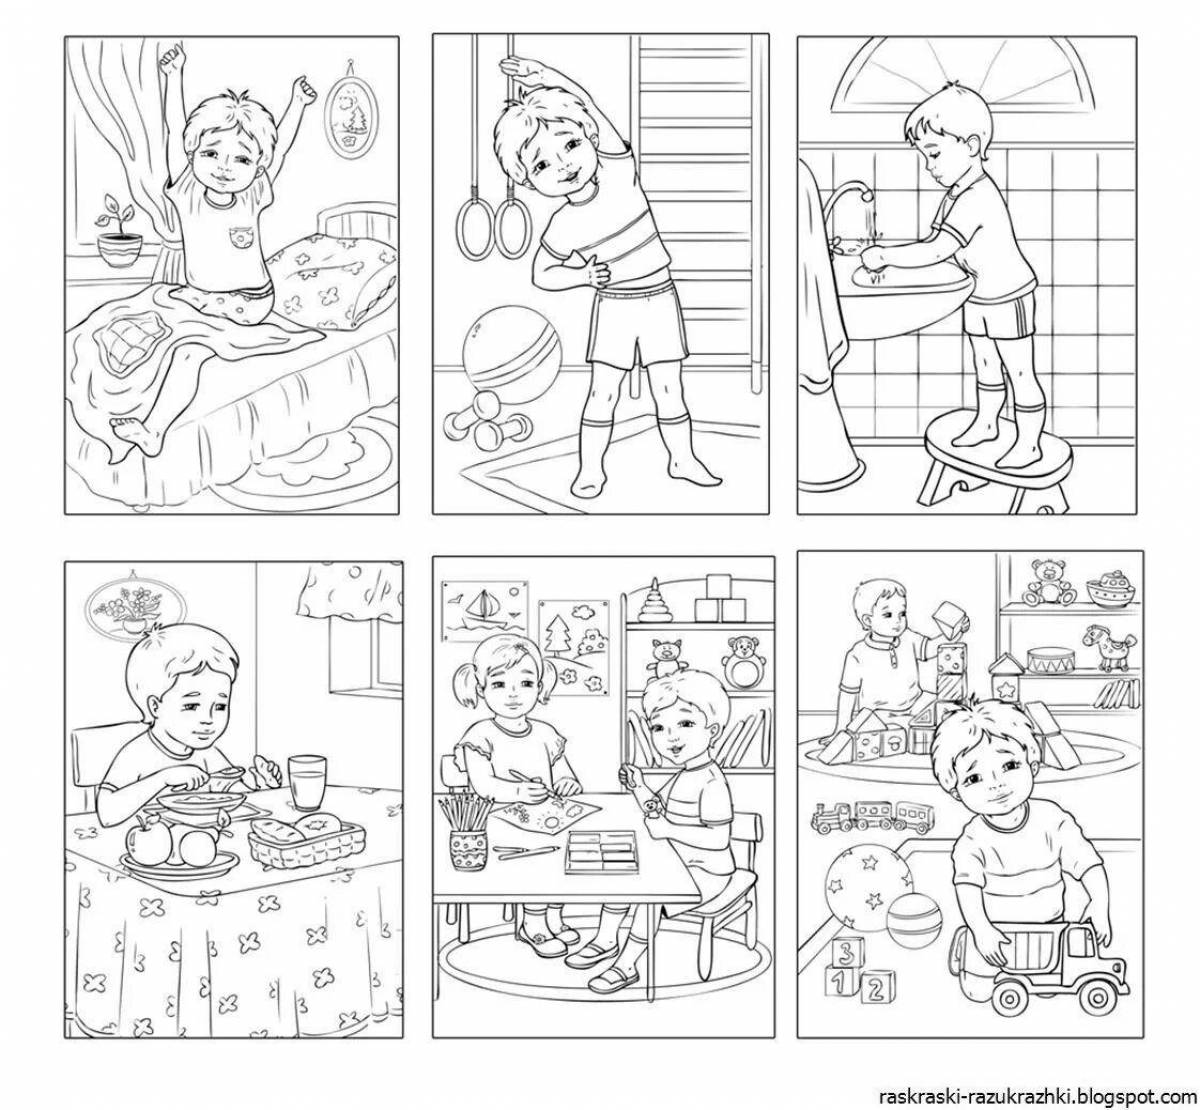 Playful healthy lifestyle coloring page